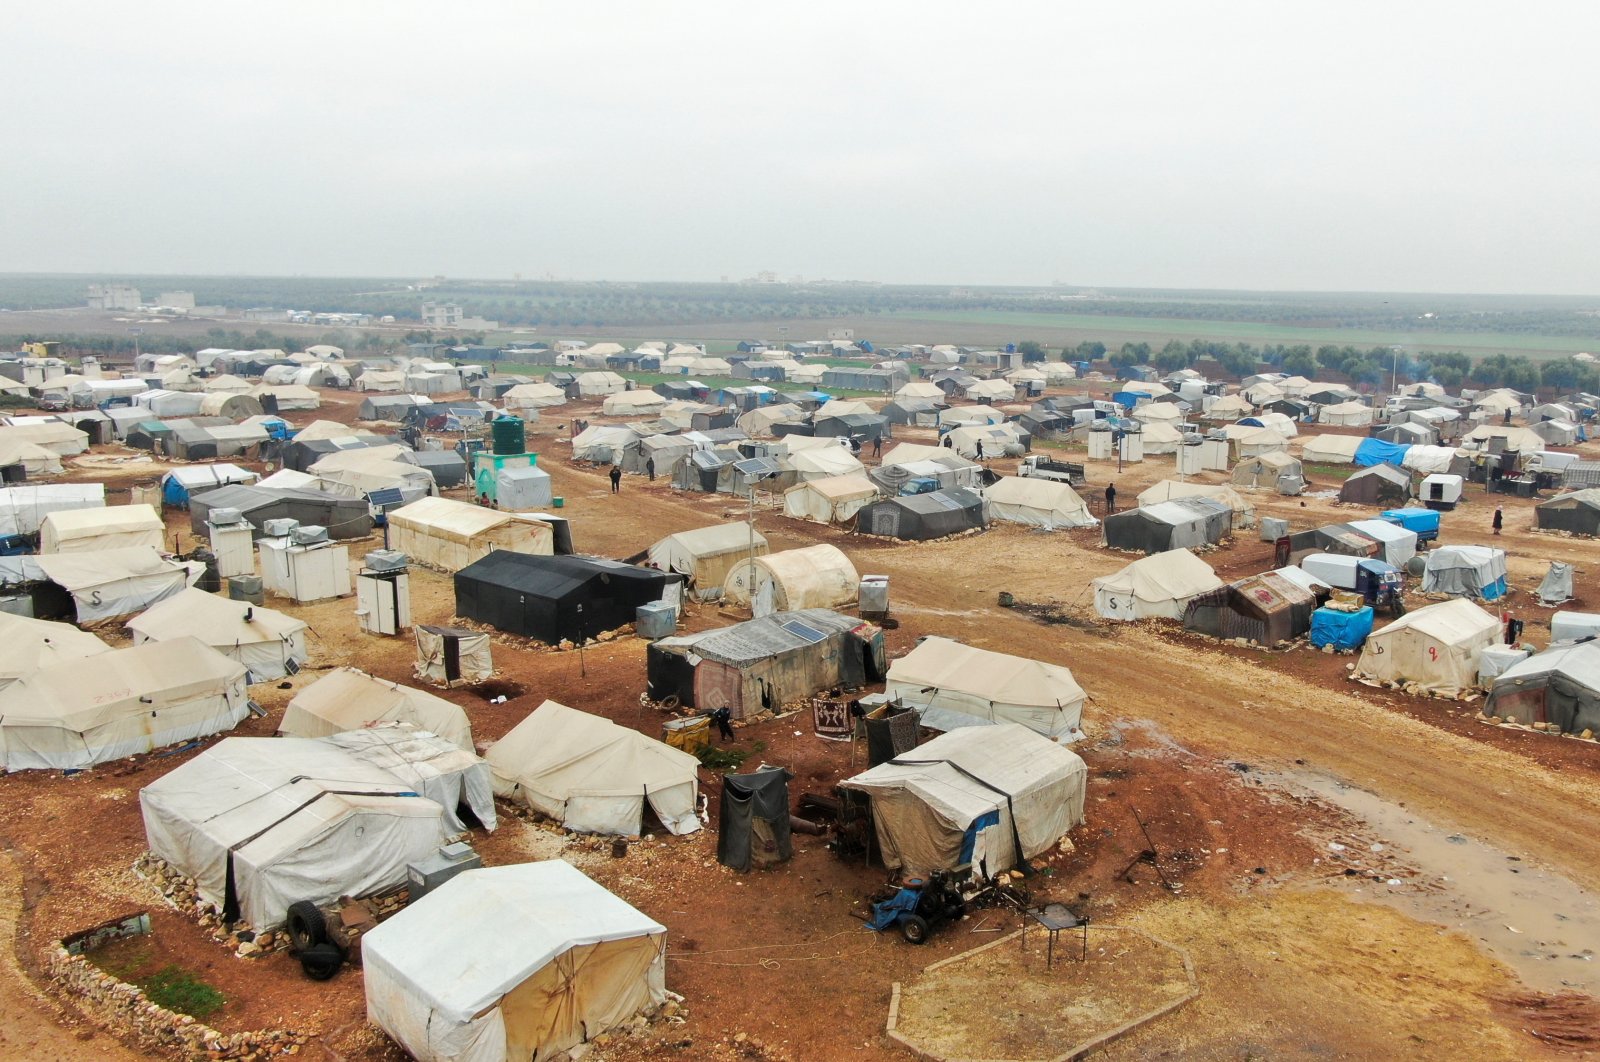 Tents are seen at a camp for internally displaced people, in Azaz, northern Syria, March 1, 2022. (REUTERS)